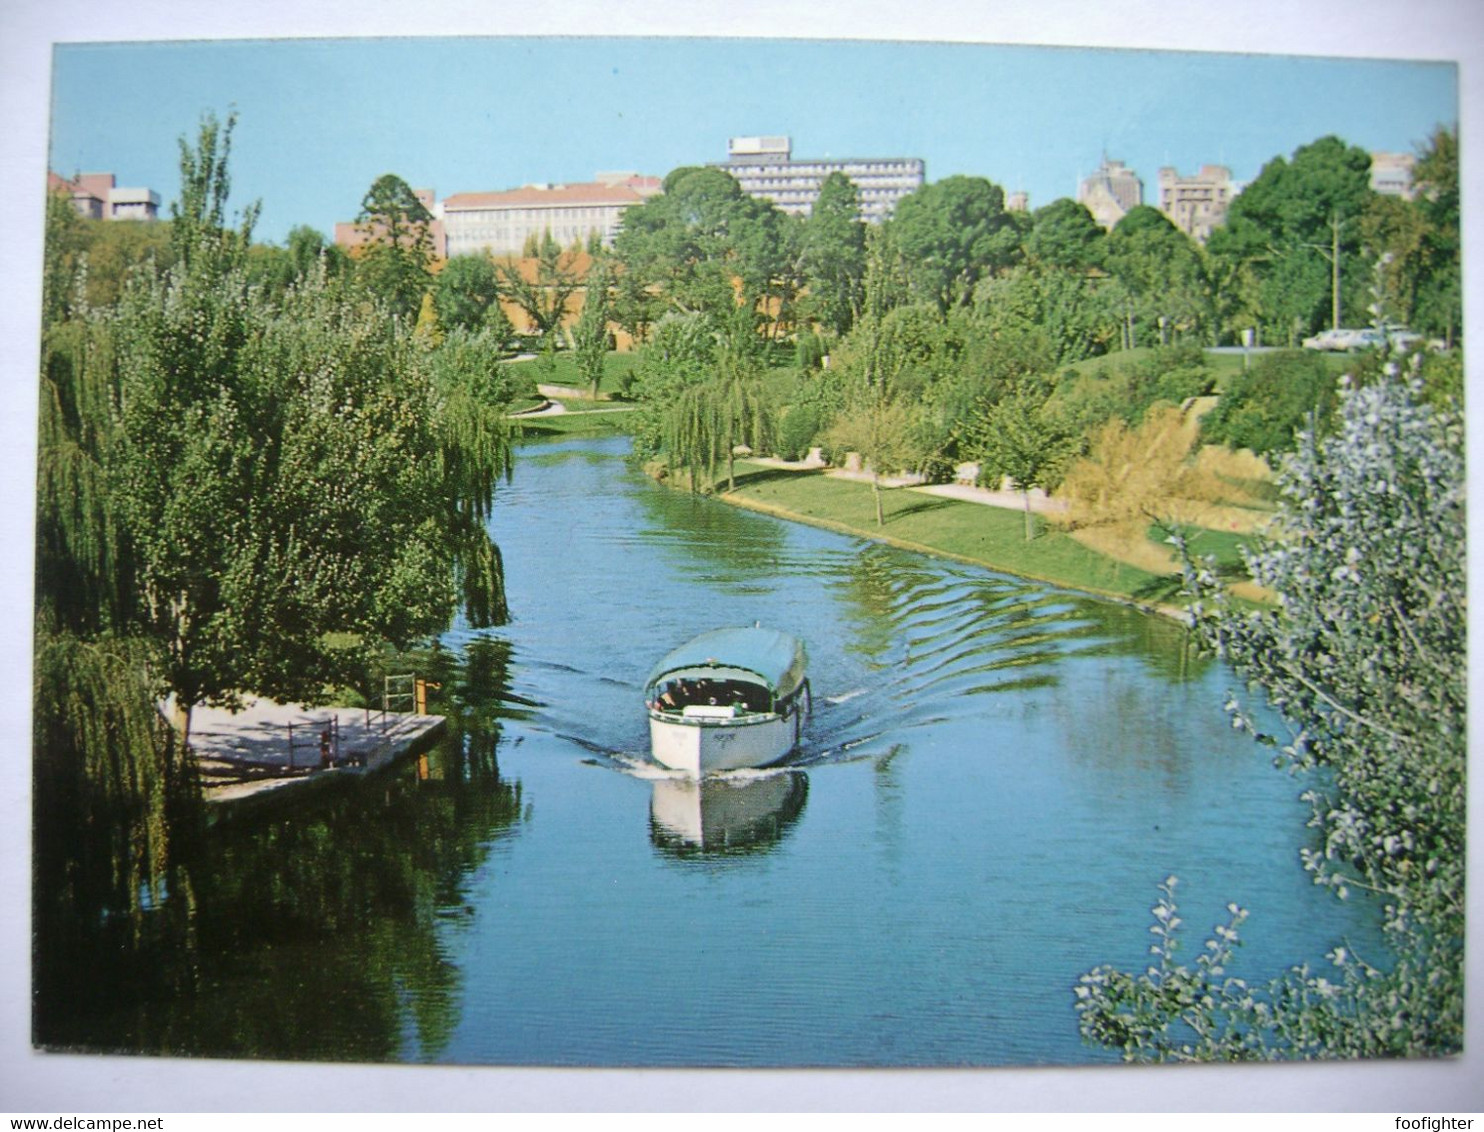 Adelaide - Torrens River - A Picturesque Scene Along The River - Adelaide